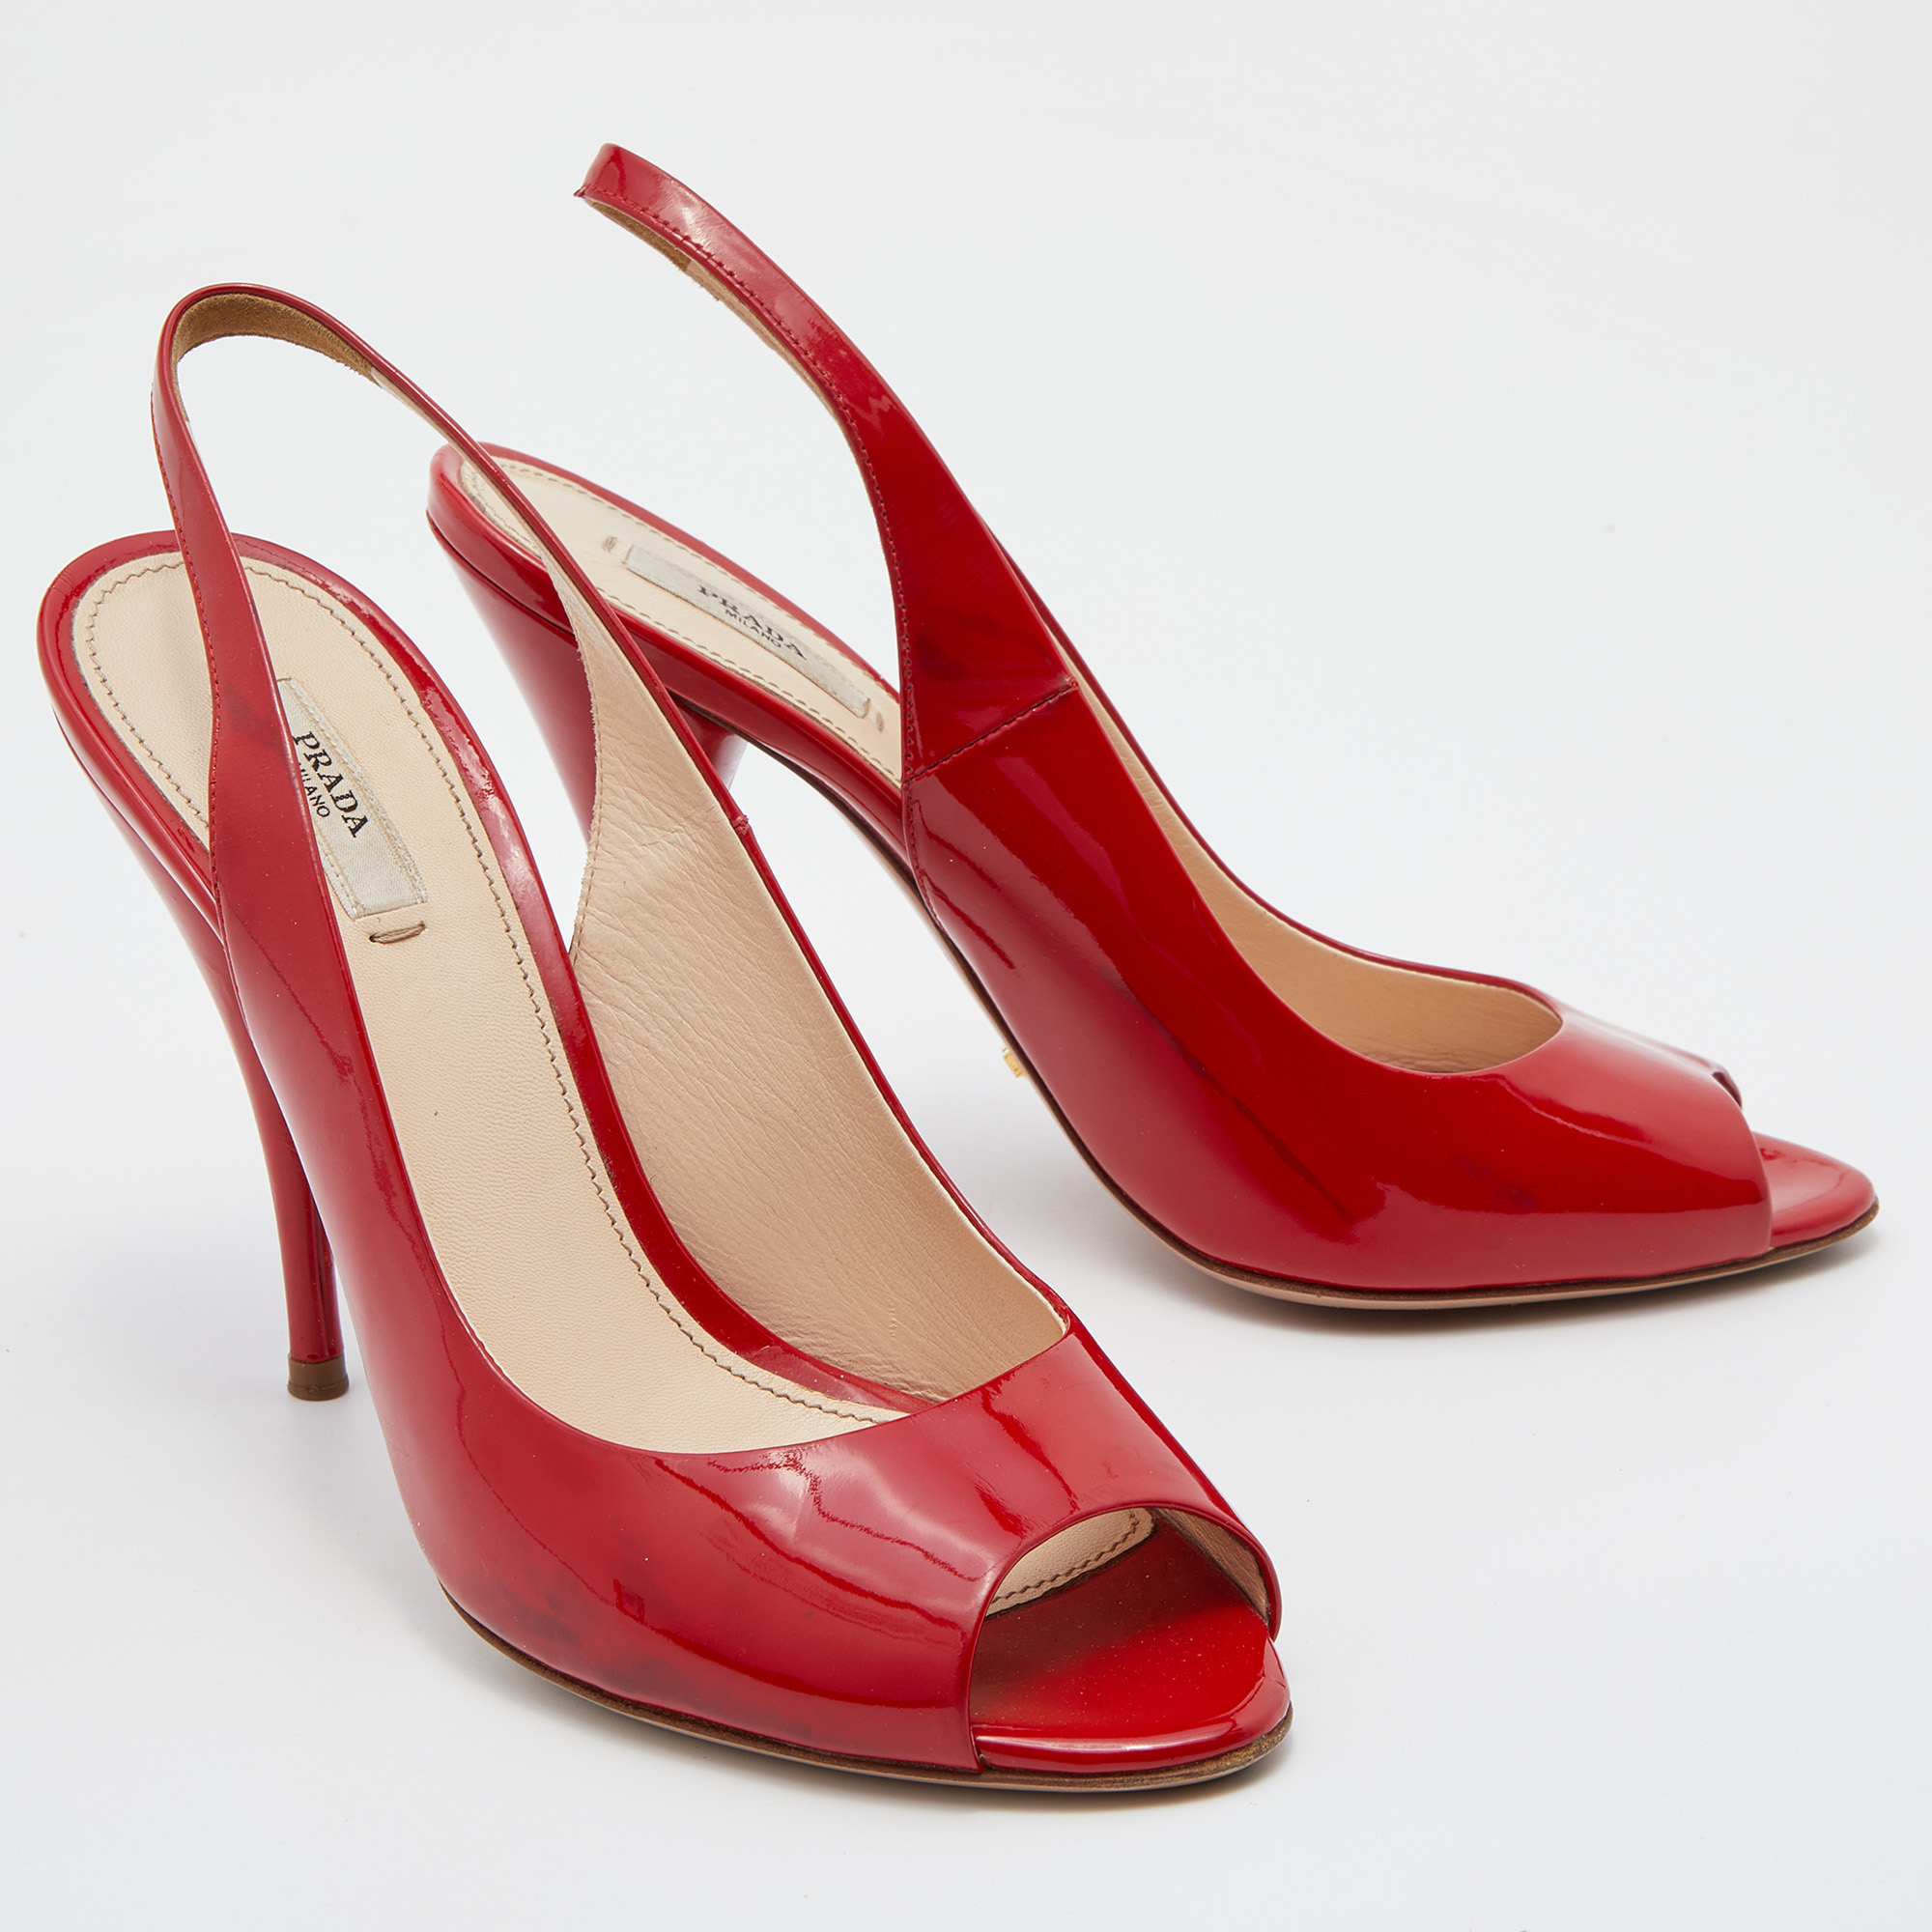 Prada Red Patent Leather Open Toe Slingback Pumps Size 40